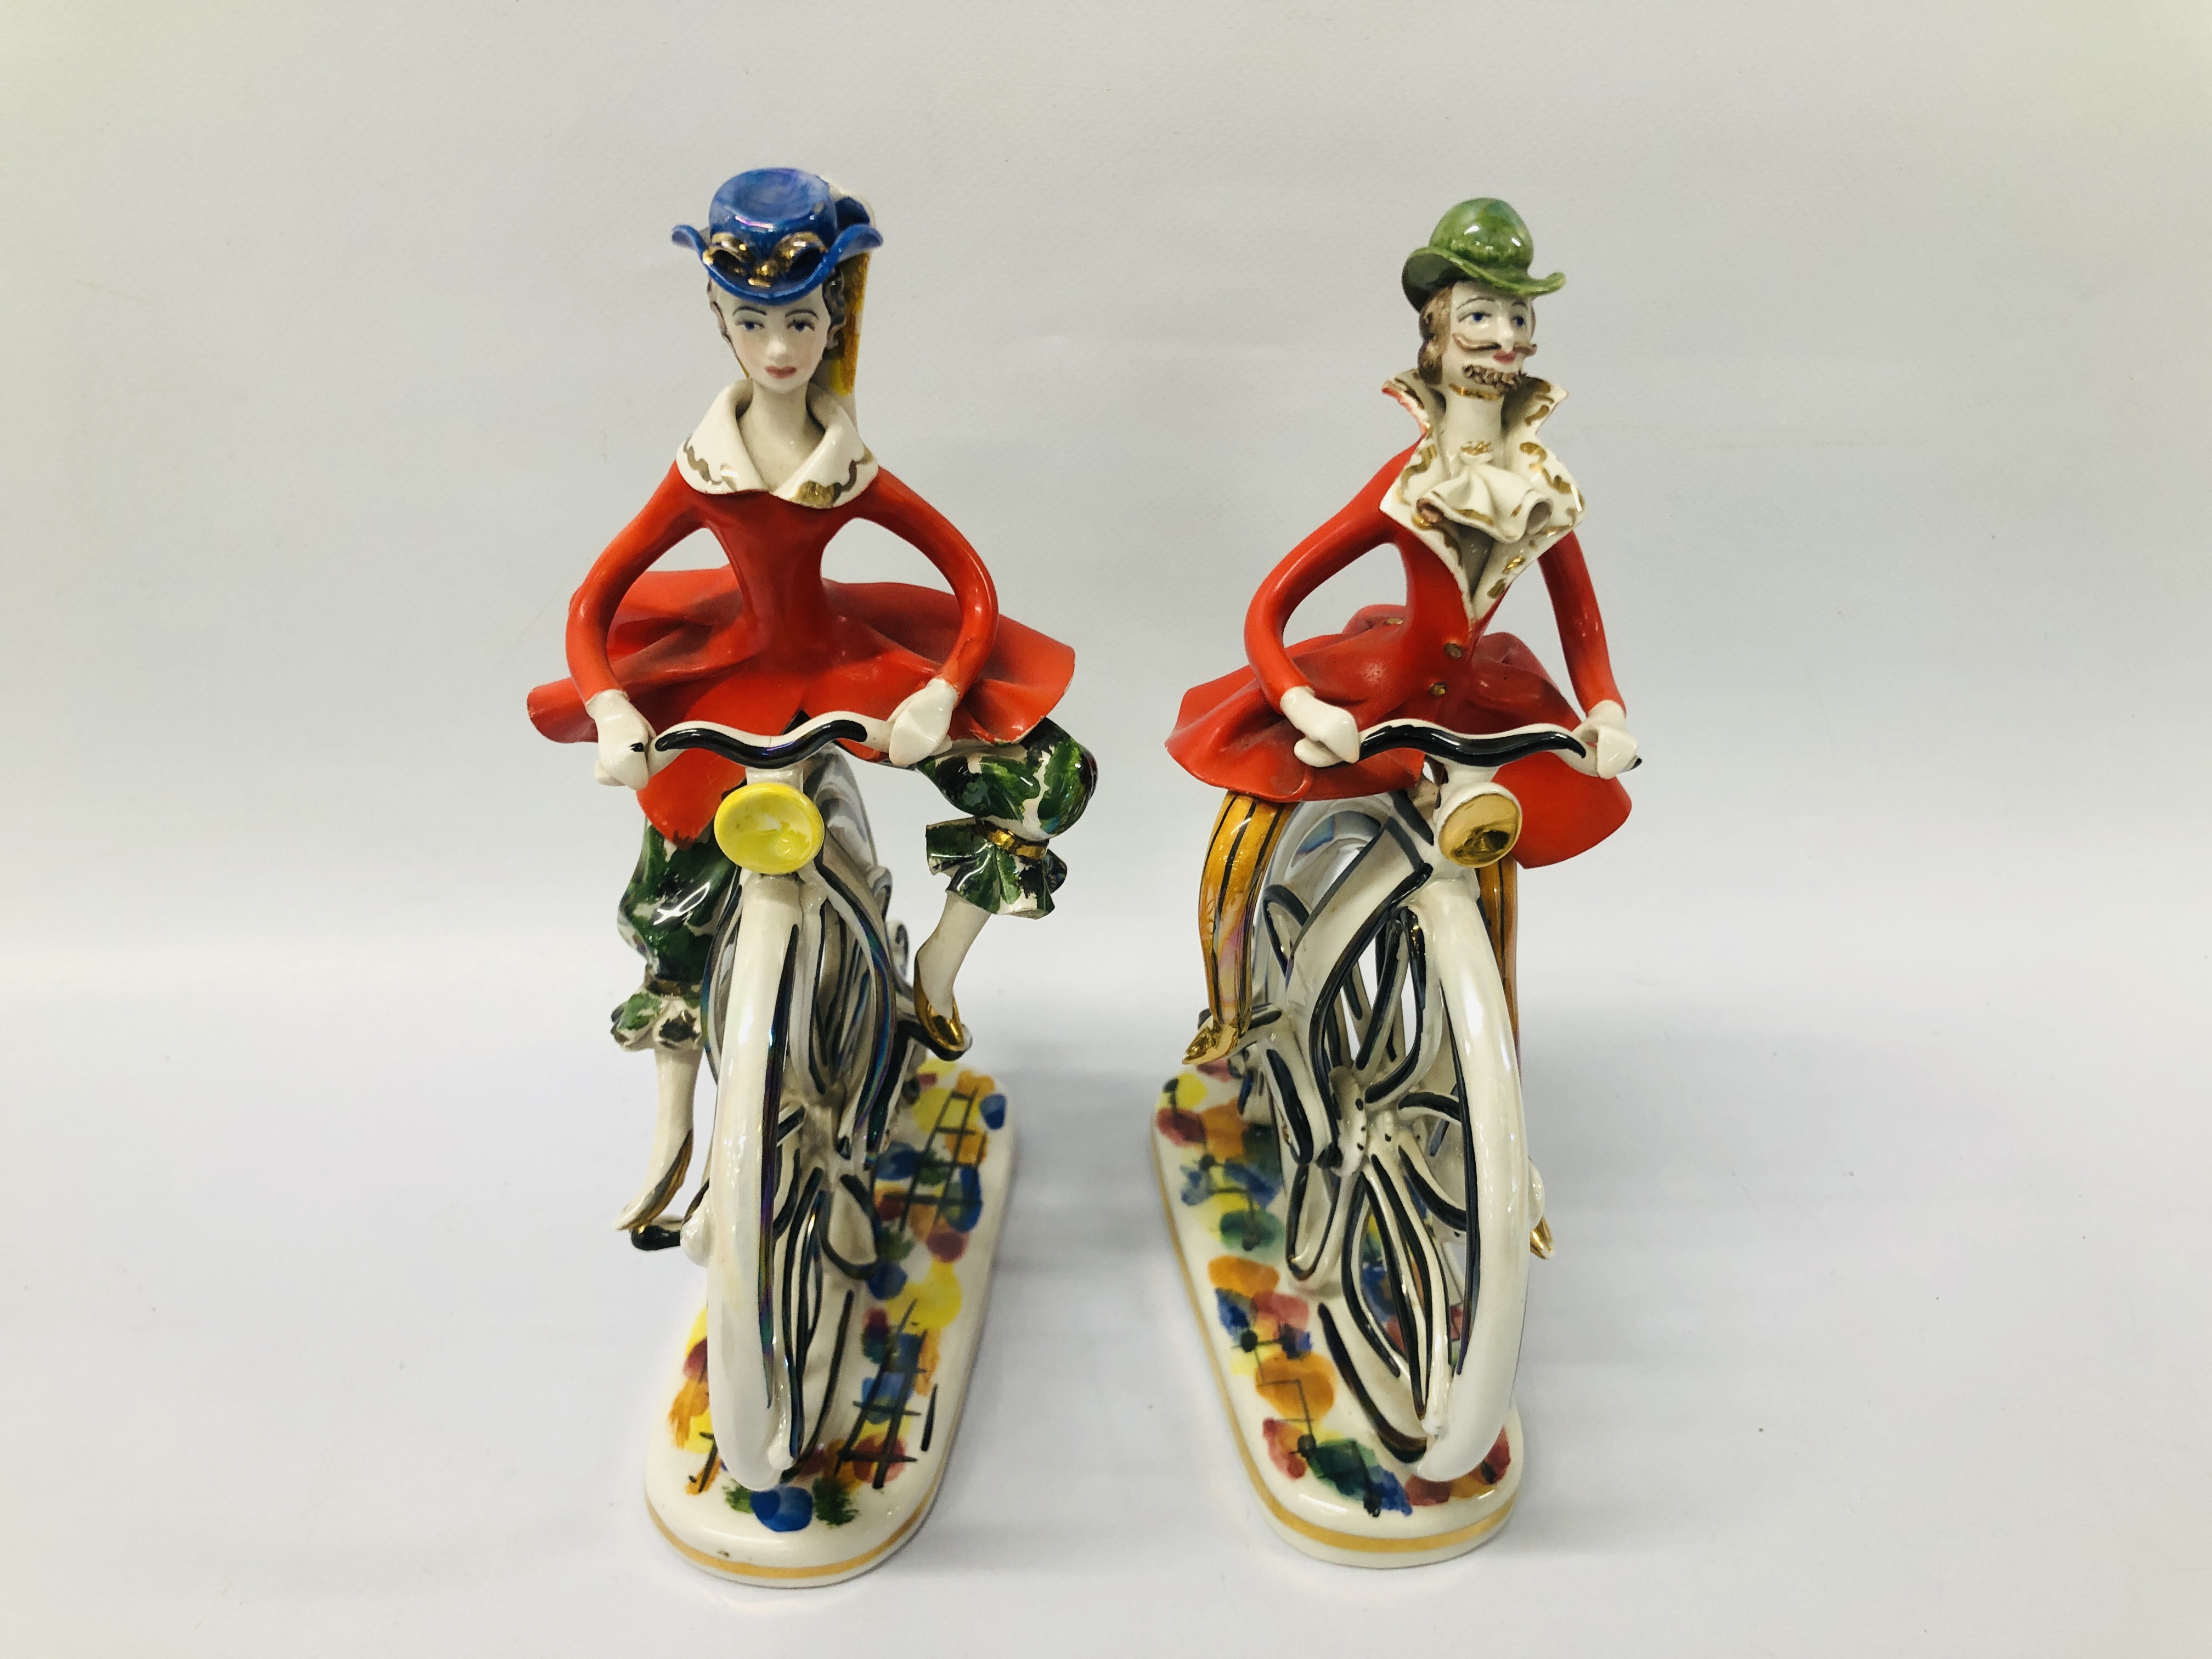 PAIR OF ITALIAN ORNAMENTS "LADY'S UPON PENNY FARTHINGS" H 24CM ALONG WITH A FIGURED CABINET - Image 7 of 10